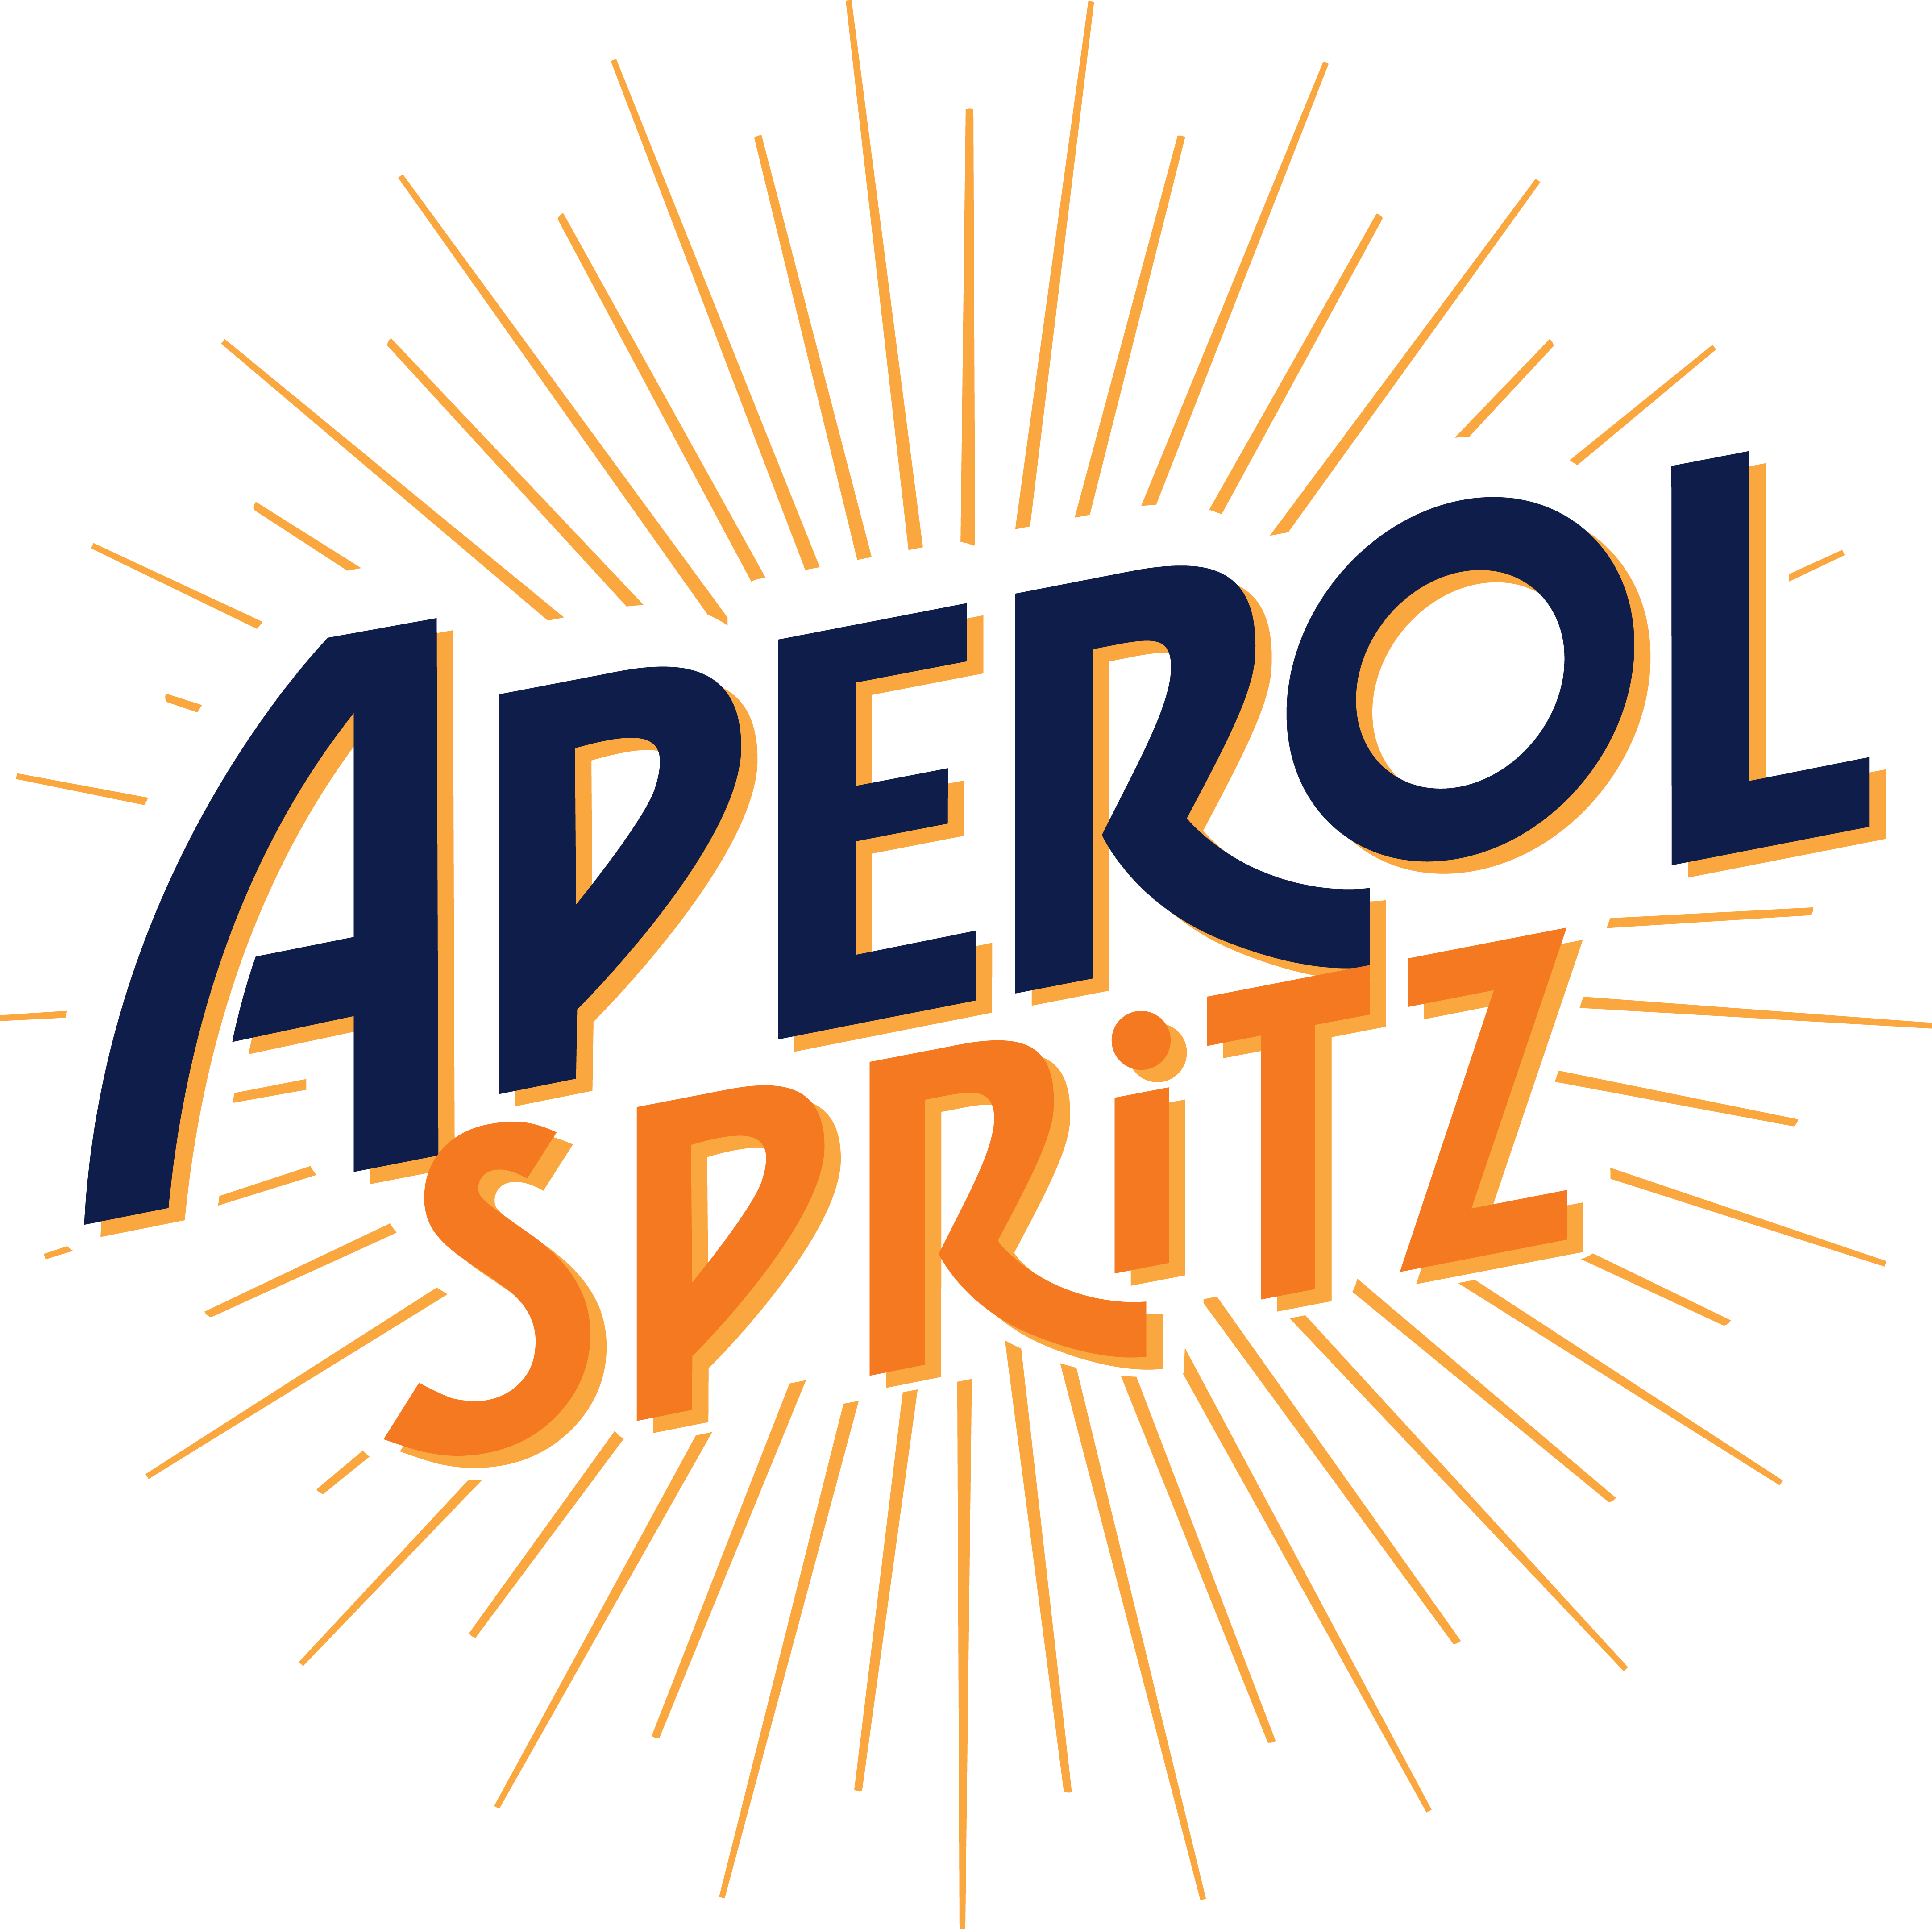 Aperol Happy Together Live